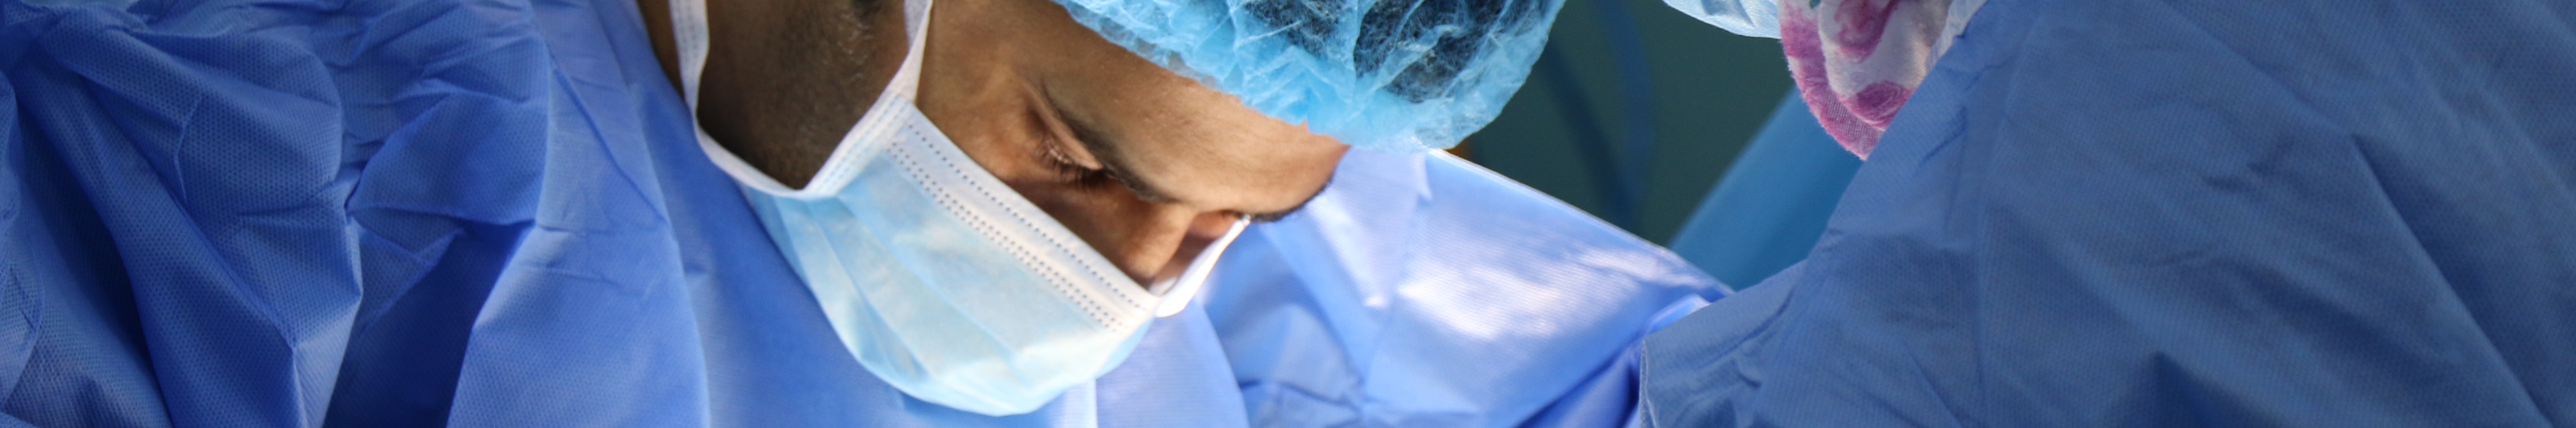 Every 25.4 seconds a surgeon begins a procedure using the DVSS offered by Intuitive Surgical